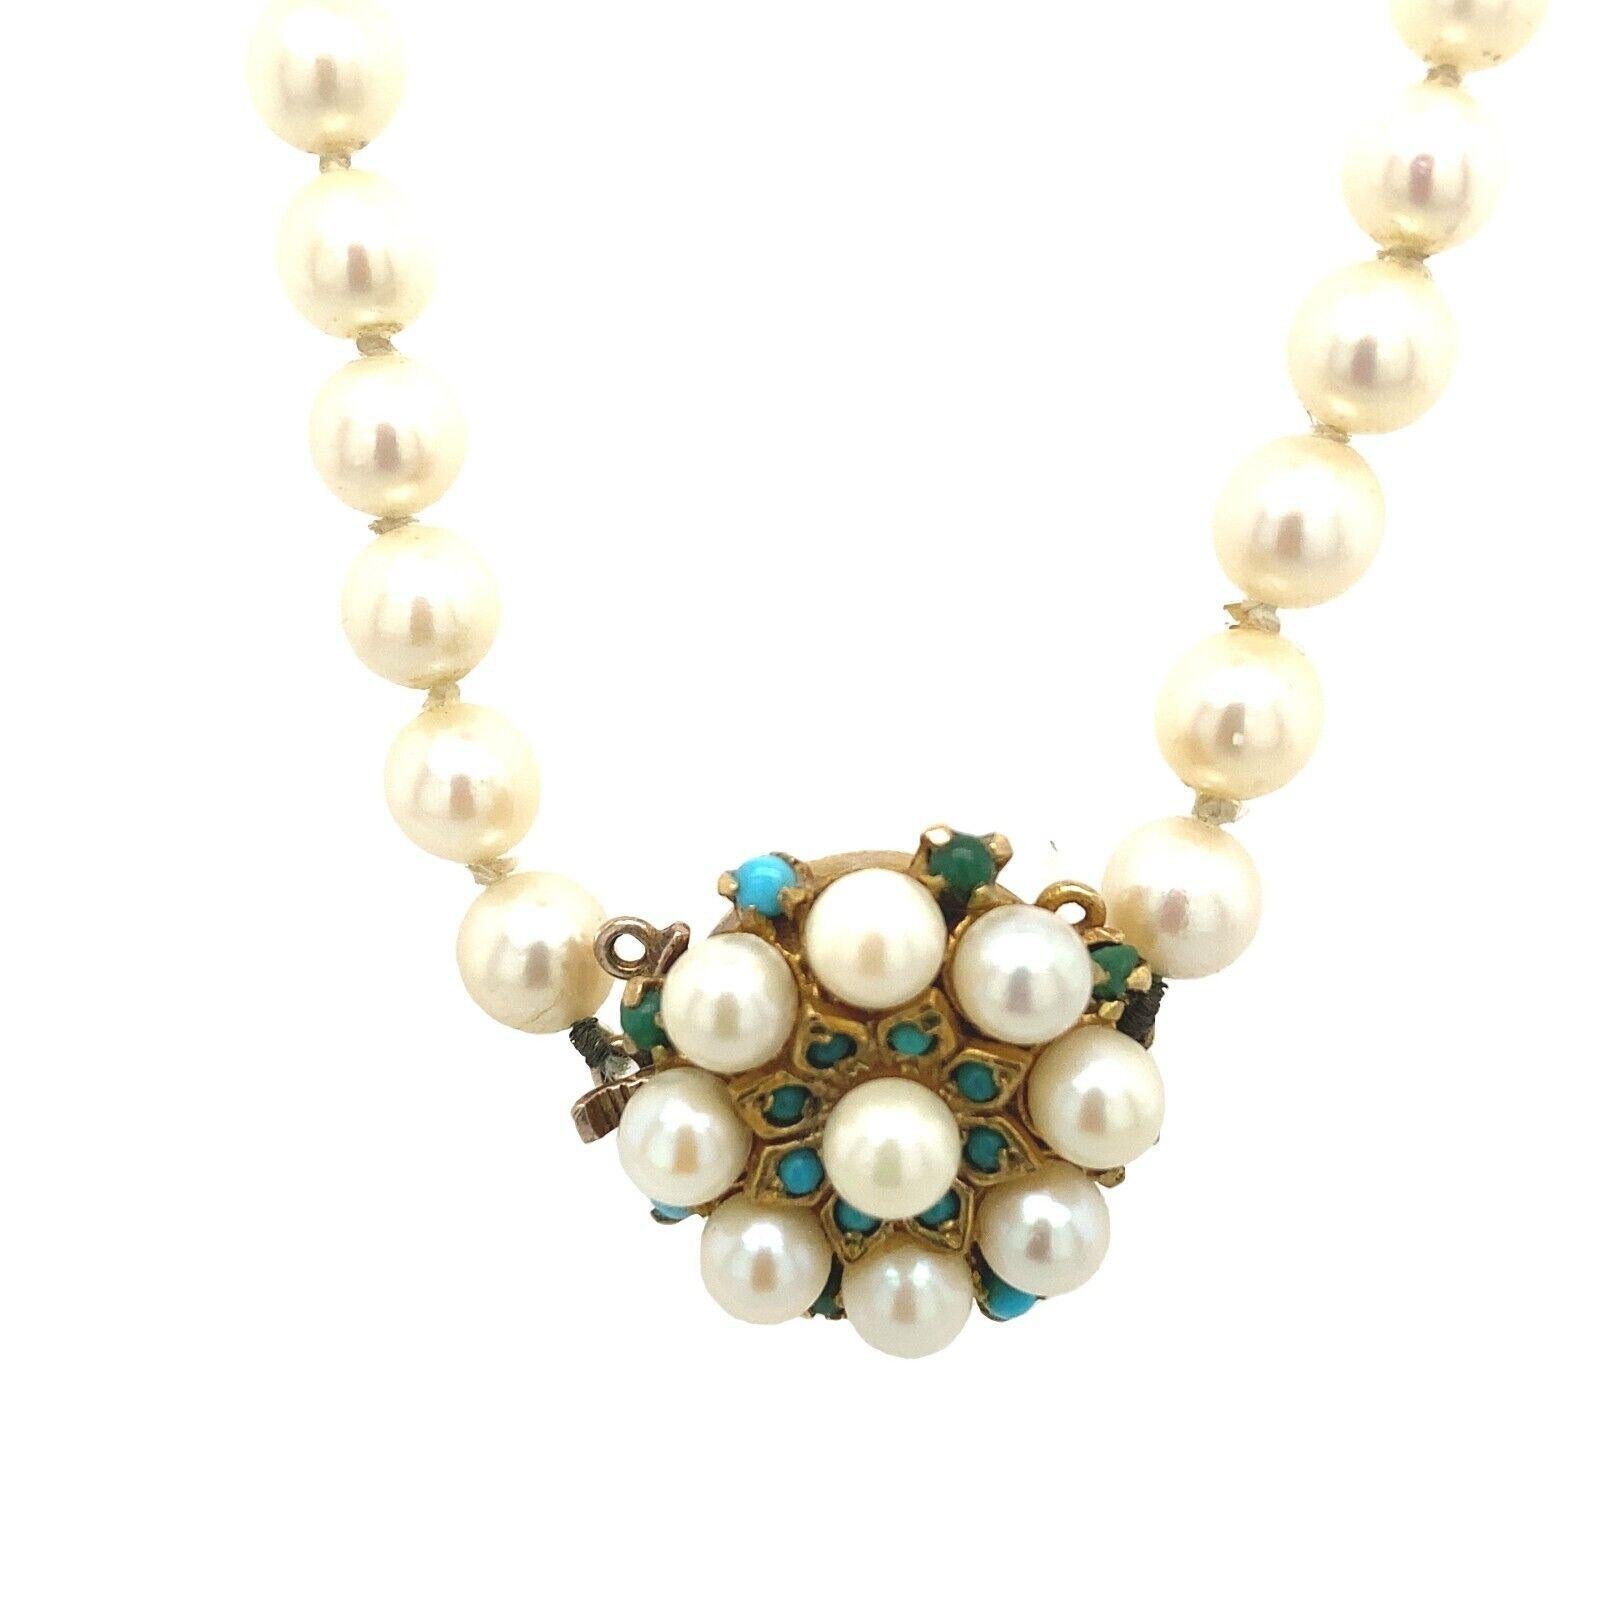 Vintage Cultured Pearl Necklace with 9ct Yellow Gold Clasp

This vintage-inspired necklace features 6.3mm cultured pearls that is framed by a 9ct yellow gold clasp, set with 16 turquoise and 9 pearls. It's a classic that never goes out of